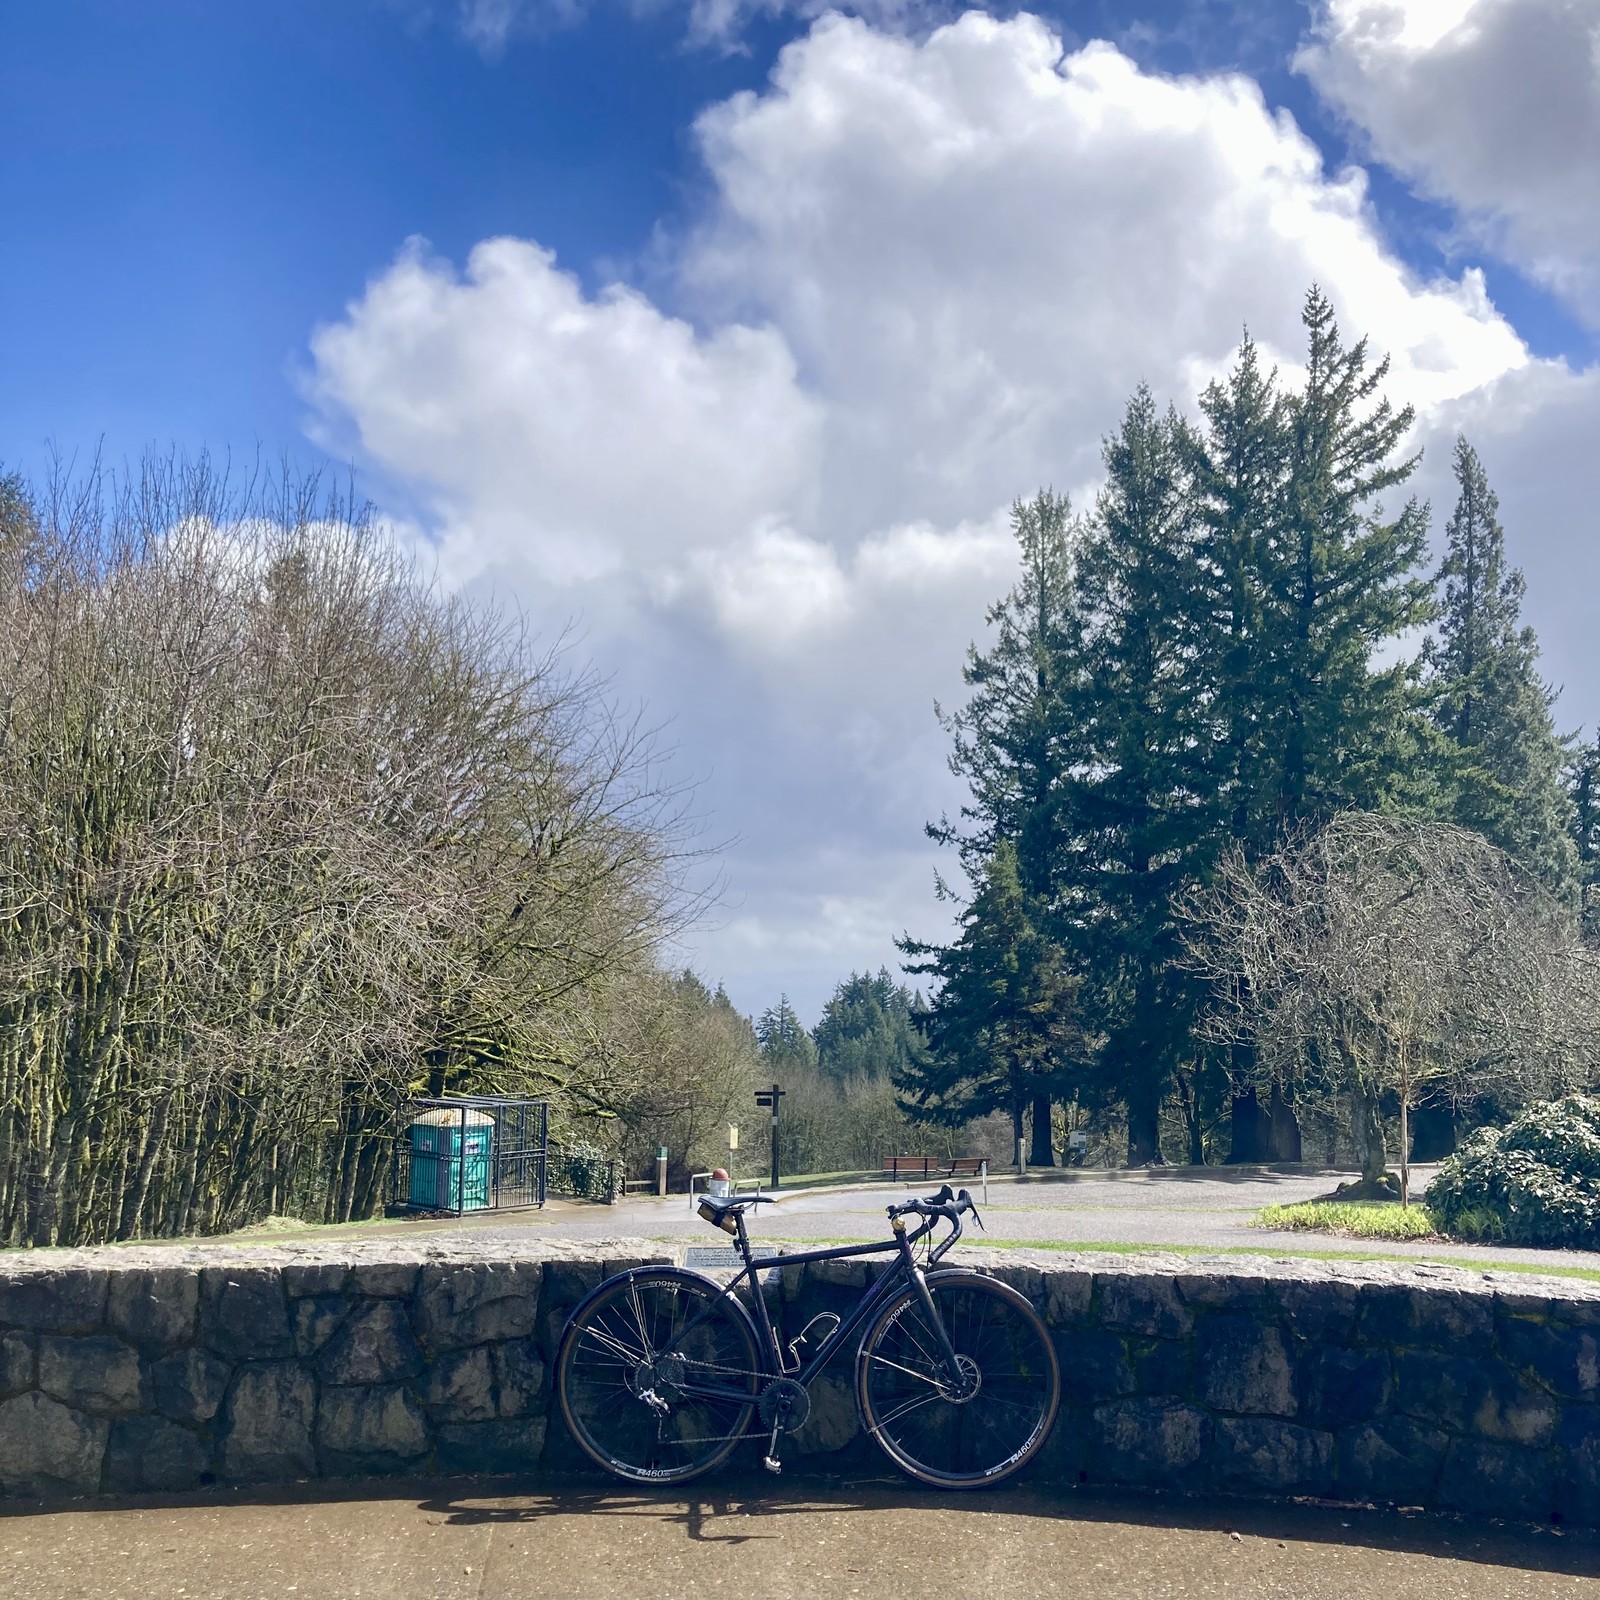 View from Council Crest Park toward Mt. Hood, which is hidden behind many clouds. In the foreground a bicycle leans against a low stone wall. Clouds heavy with rain shine brightly in the early afternoon sunlight. It is a short sunbreak between heavy thunderstorms.